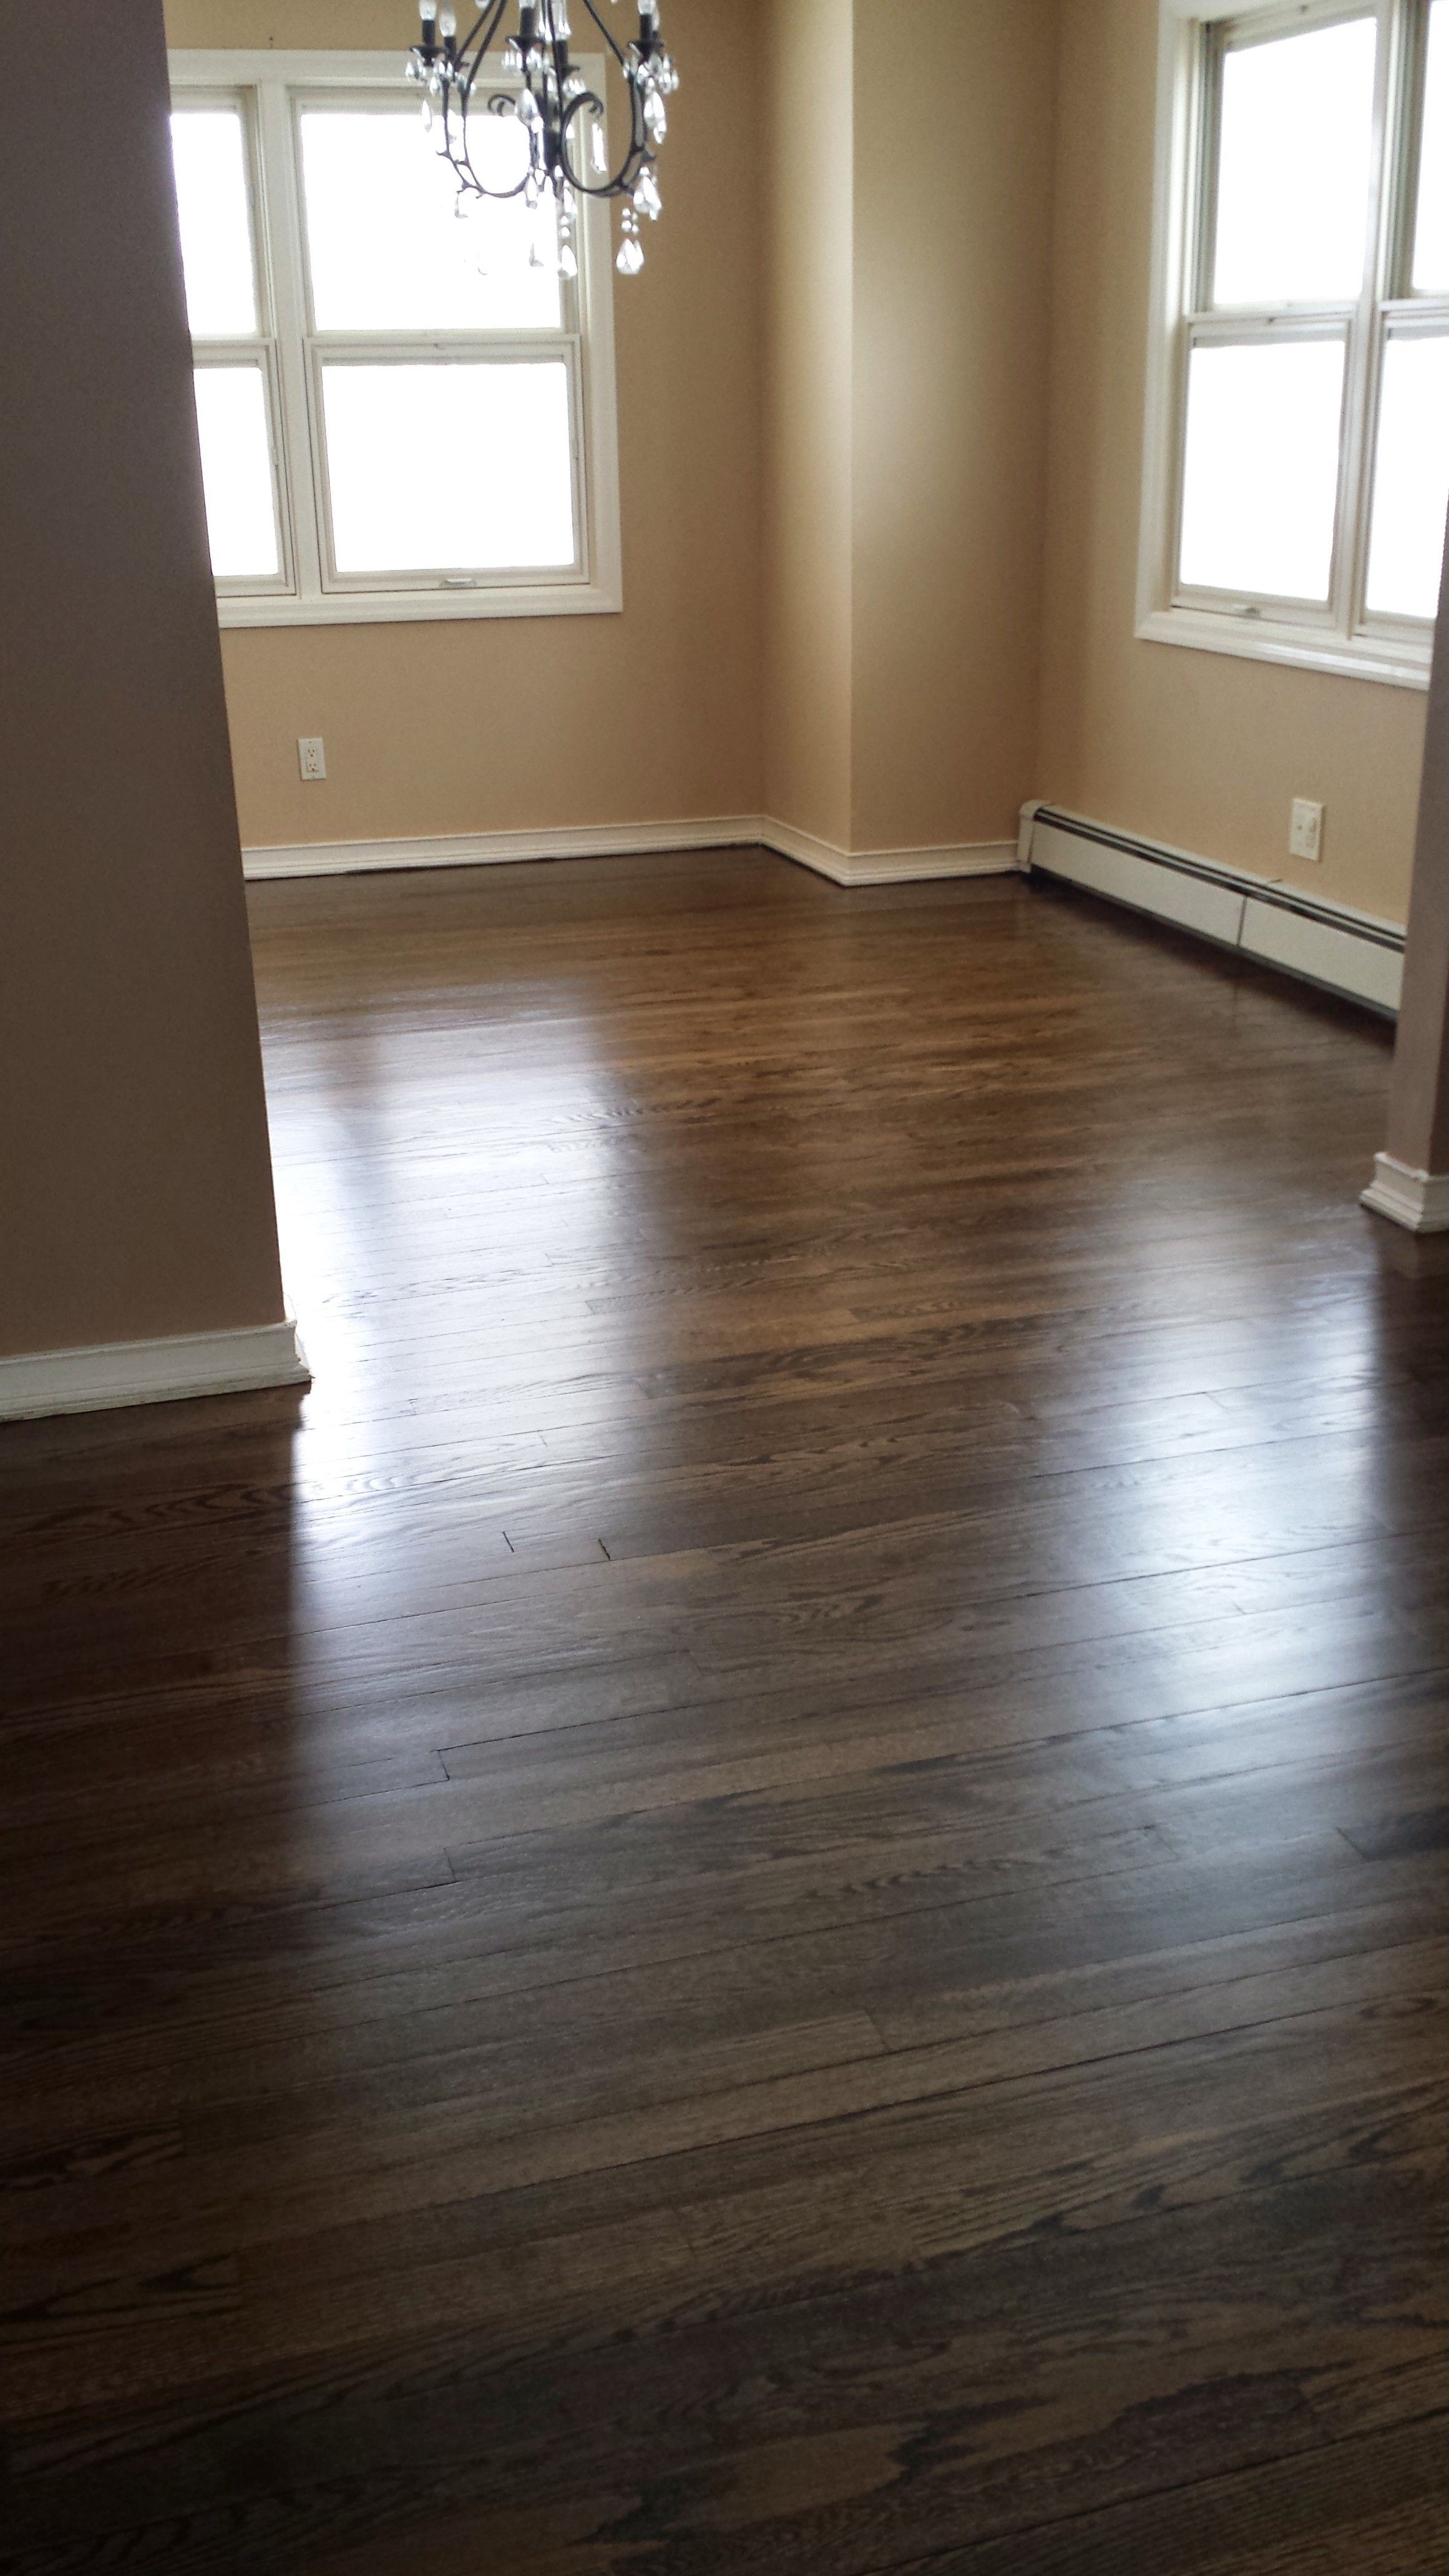 10 Recommended Hardwood Flooring Faq 2024 free download hardwood flooring faq of hardwood floor refinishing is an affordable way to spruce up your intended for hardwood floor refinishing is an affordable way to spruce up your space without a full